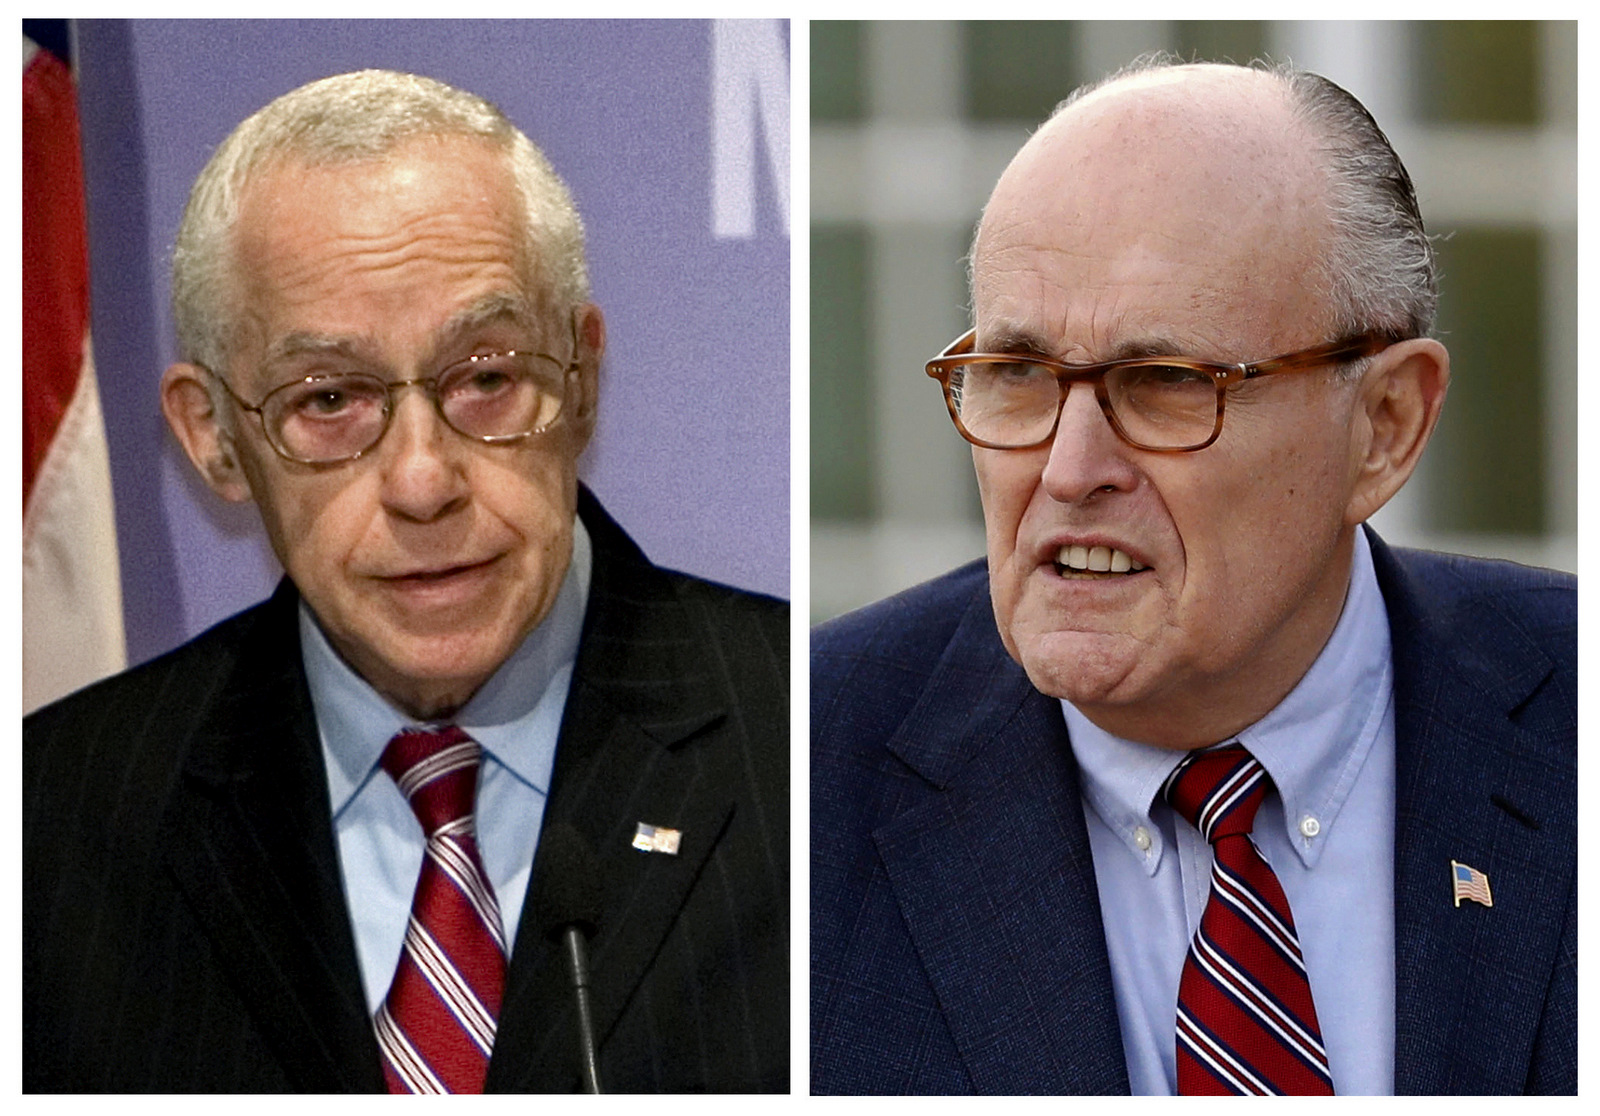 Then Attorney General Michael Mukasey, left, speaks at the U.S. Holocaust Memorial Museum in Washington on Dec. 16, 2008 and former New York Mayor Rudy Giuliani arrives for meetings with President-elect Donald Trump on Nov. 20, 2016, in Bedminster, N.J. (AP/J. Scott Applewhite, left, and Carolyn Kaster)